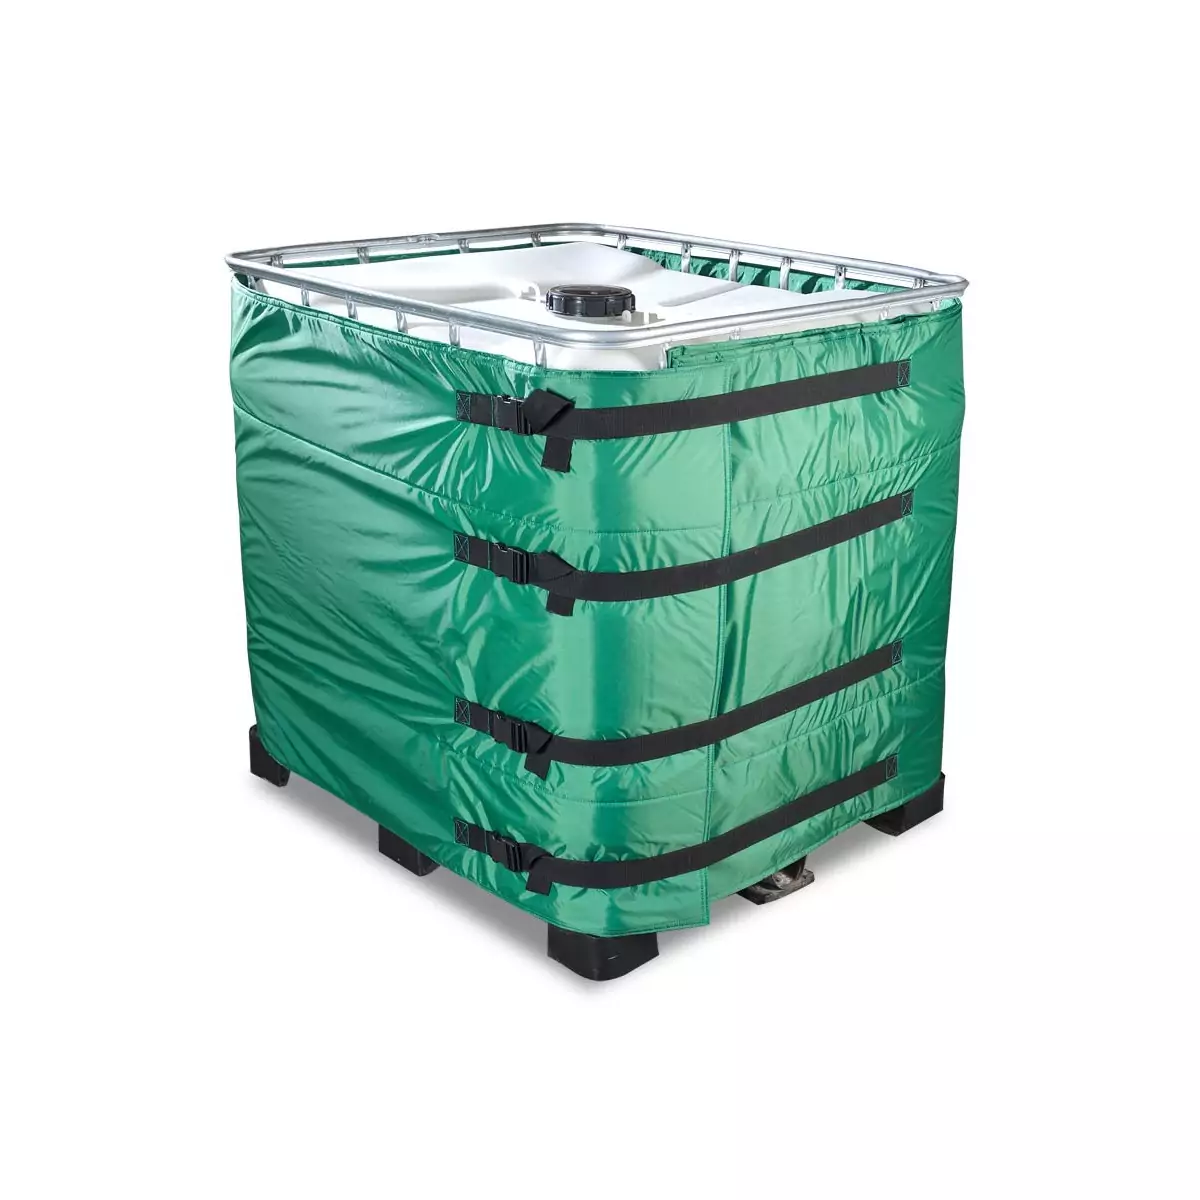 https://www.multitanks.com/2166-thickbox_default/ibc-container-insulating-lateral-cover.webp